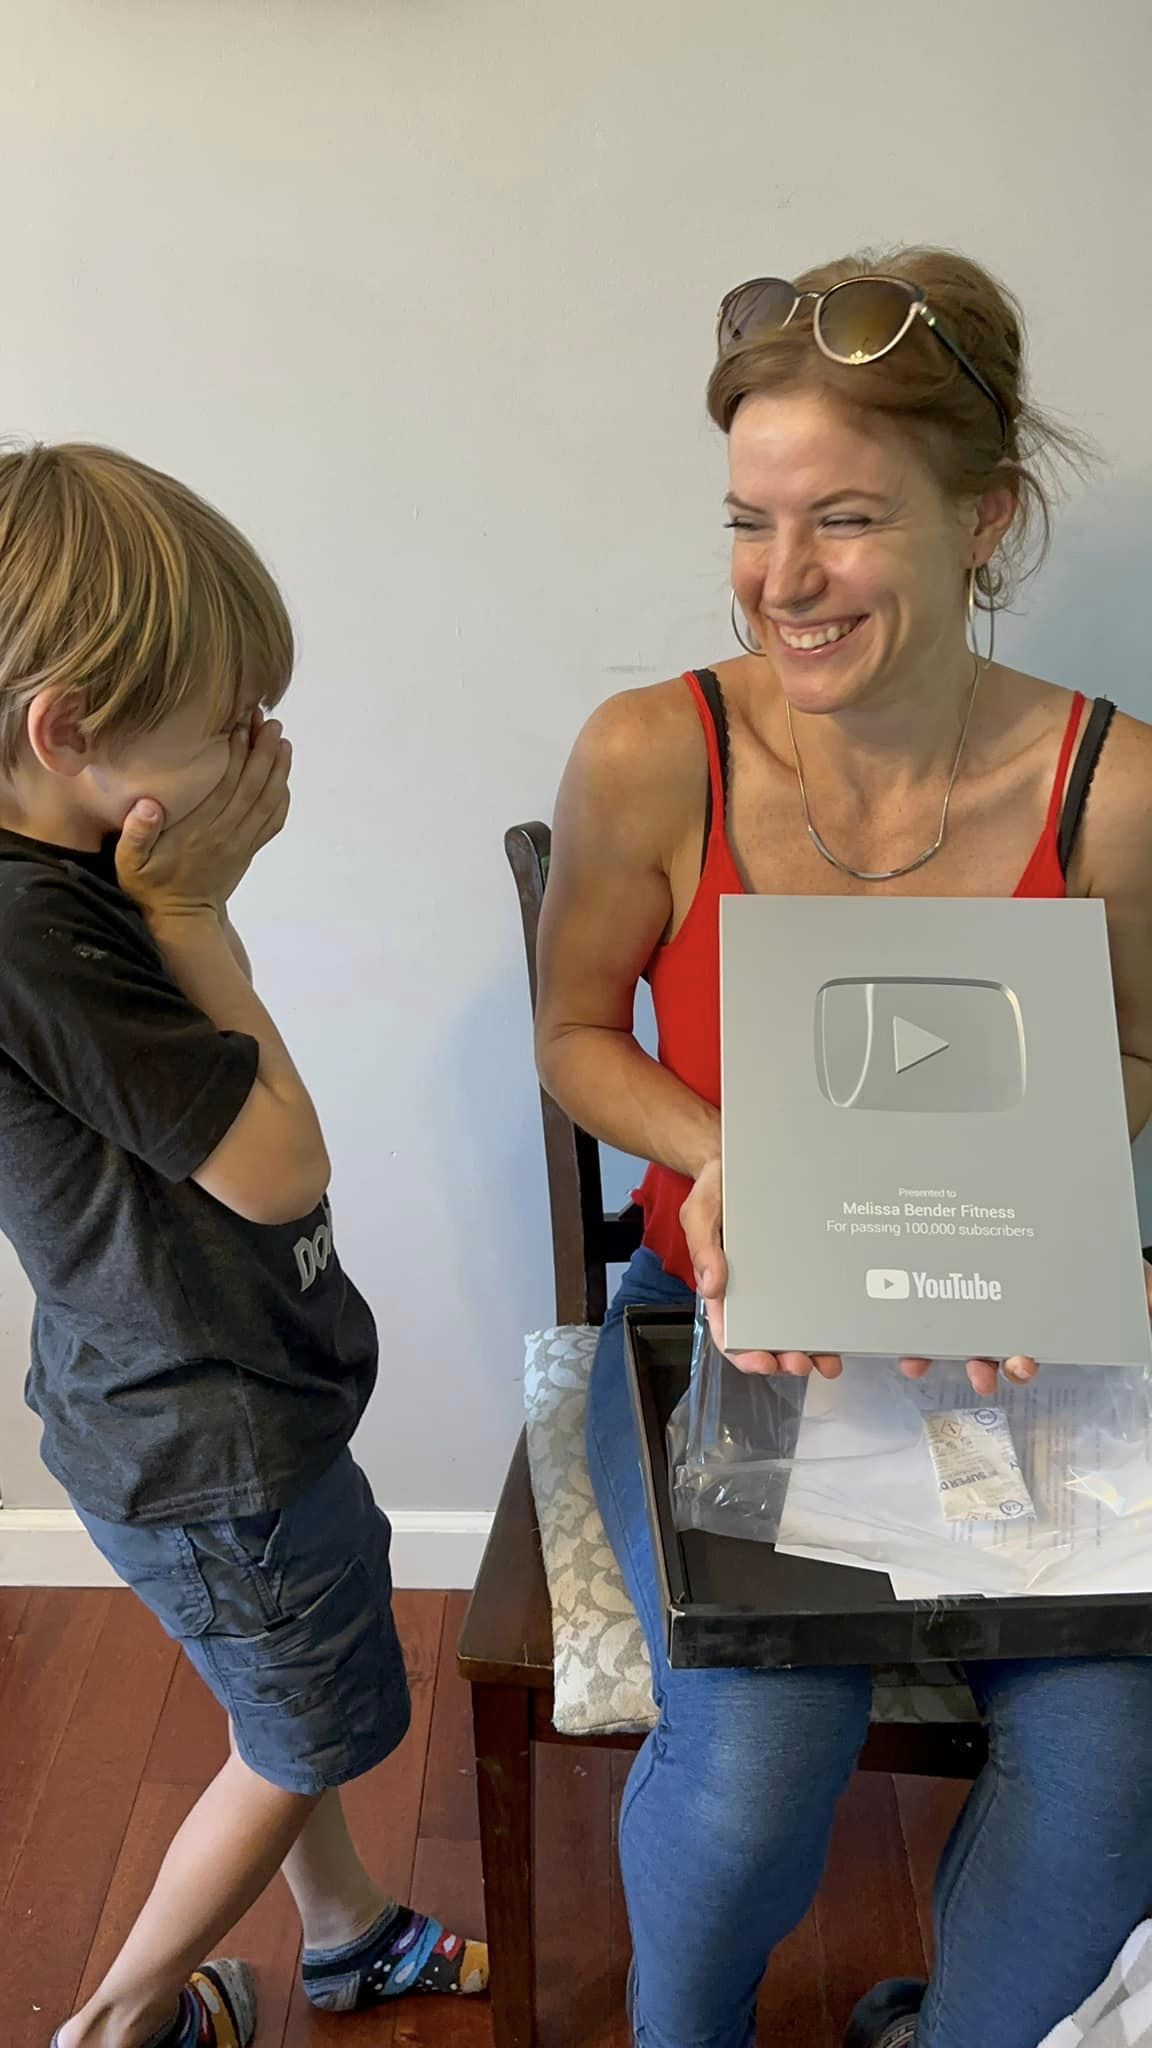 Getting a silver play button award from YouTube